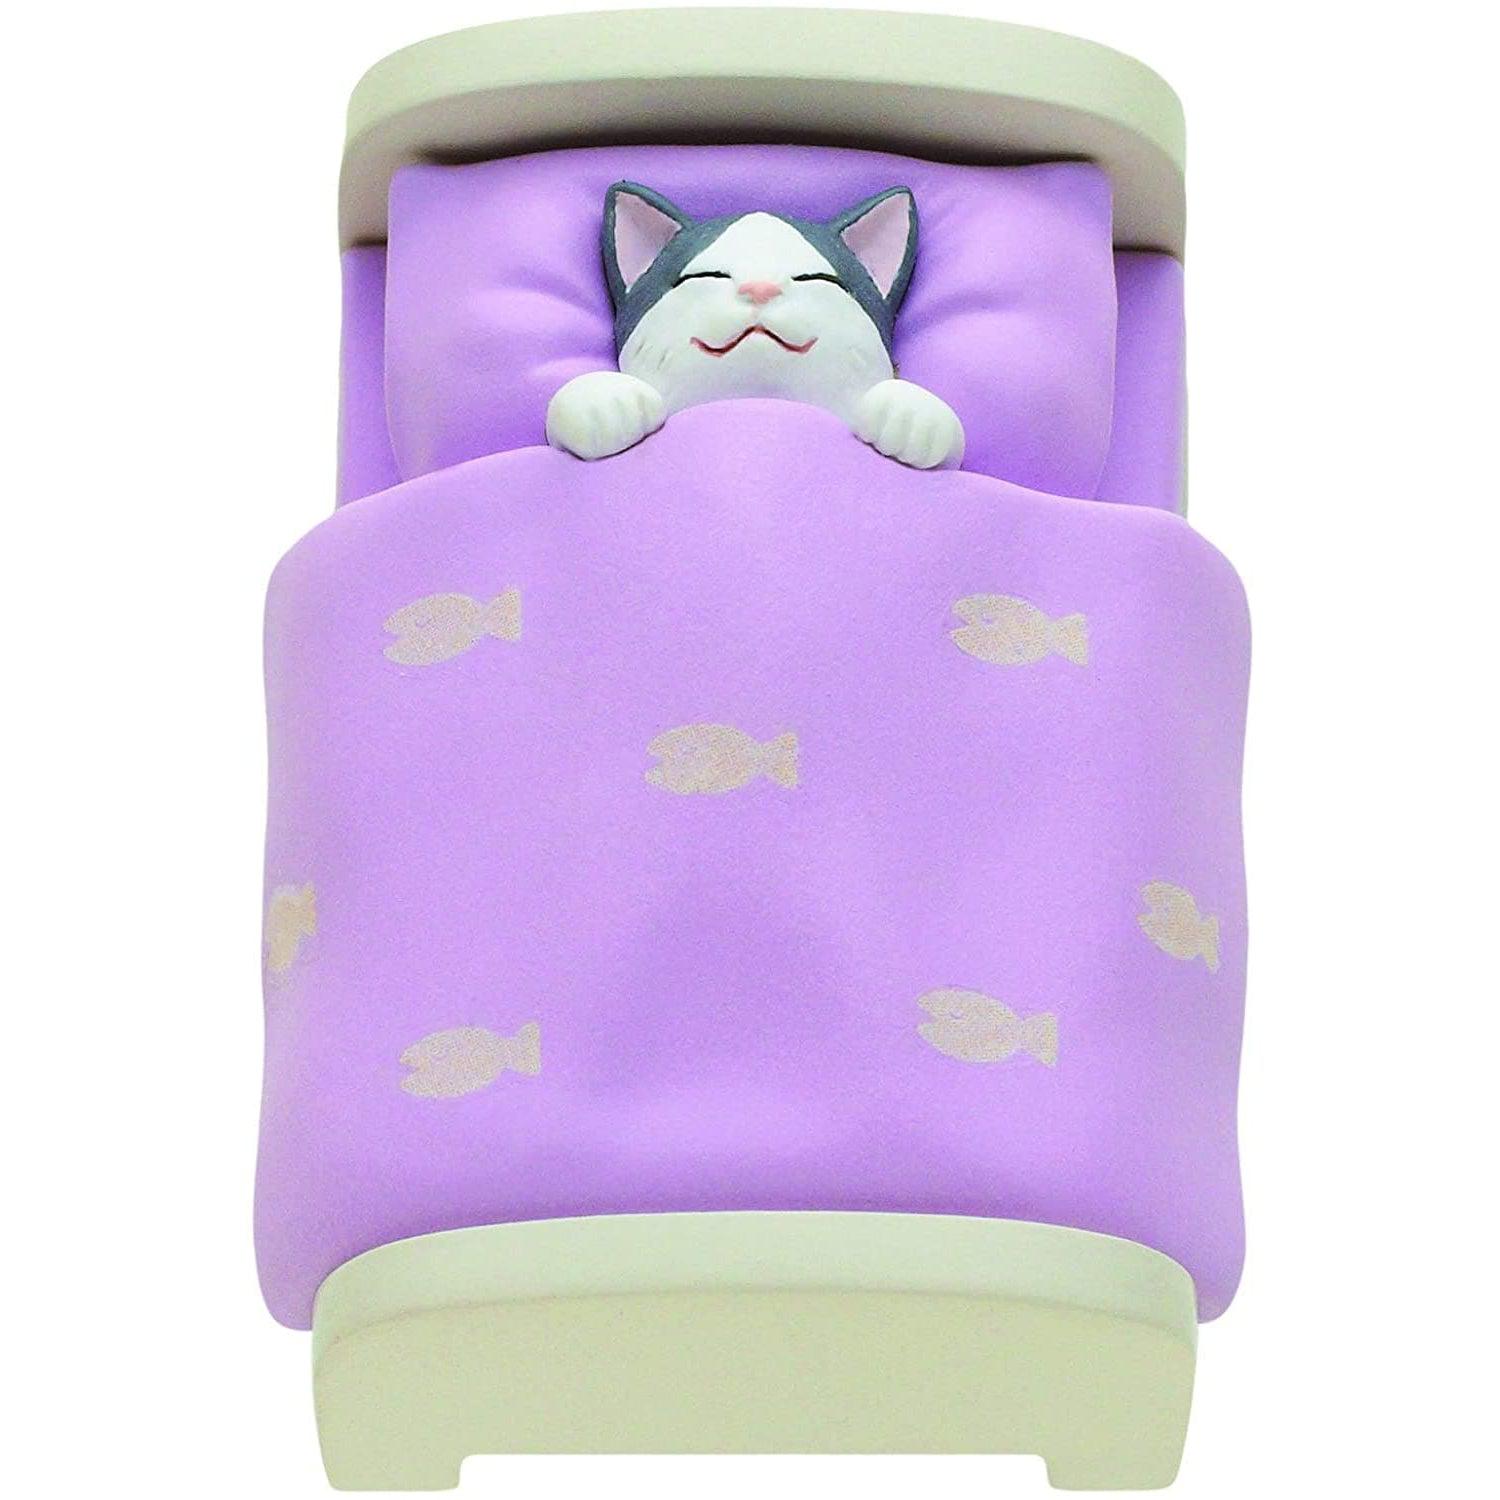 Clever Idiots-Kitan Club - Cat in a Bed Blind Box - Assorted Styles-KC-056-Legacy Toys